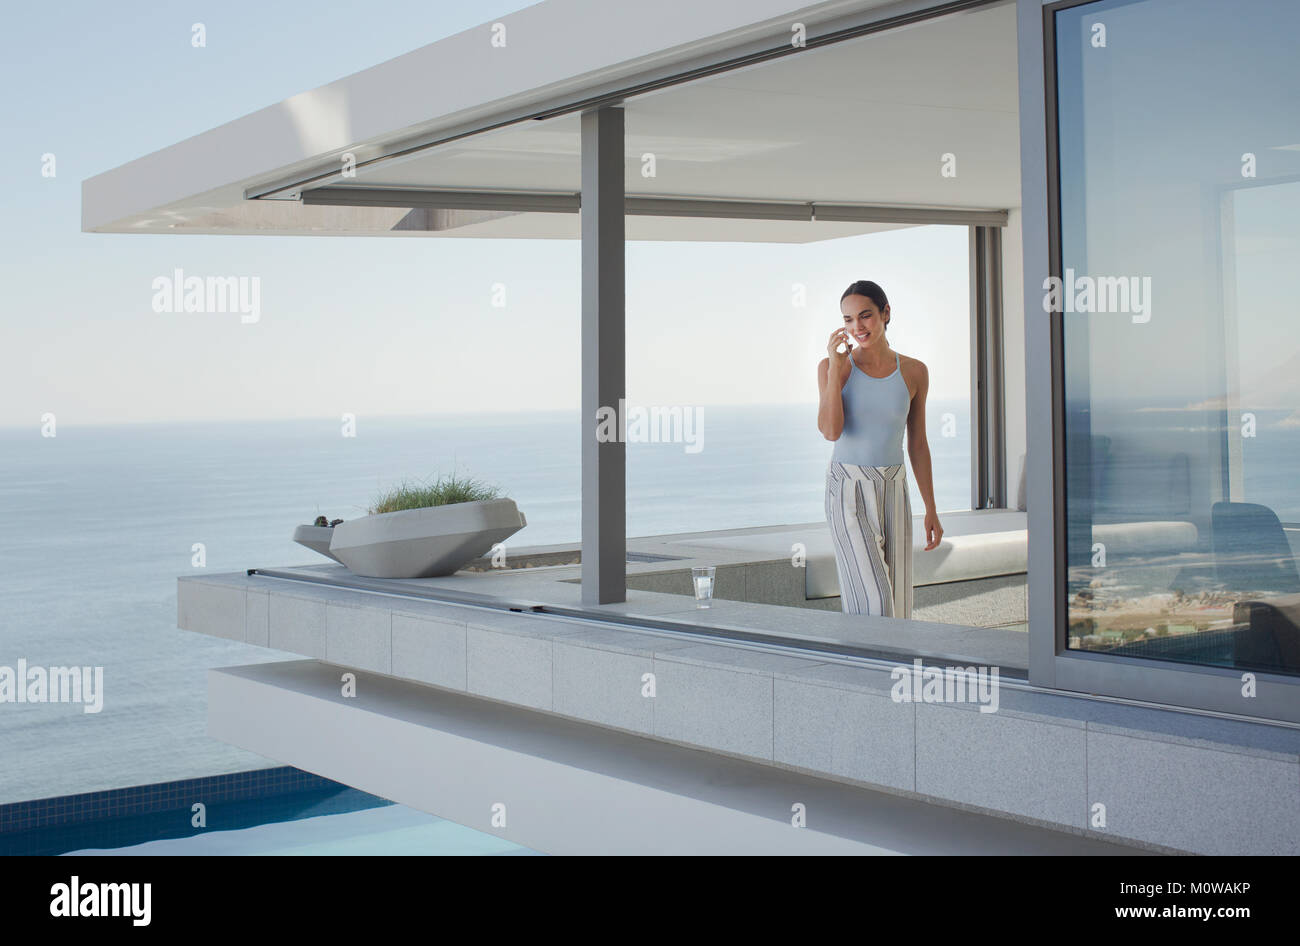 Woman talking on cell phone on modern, luxury home showcase exterior patio with ocean view Stock Photo